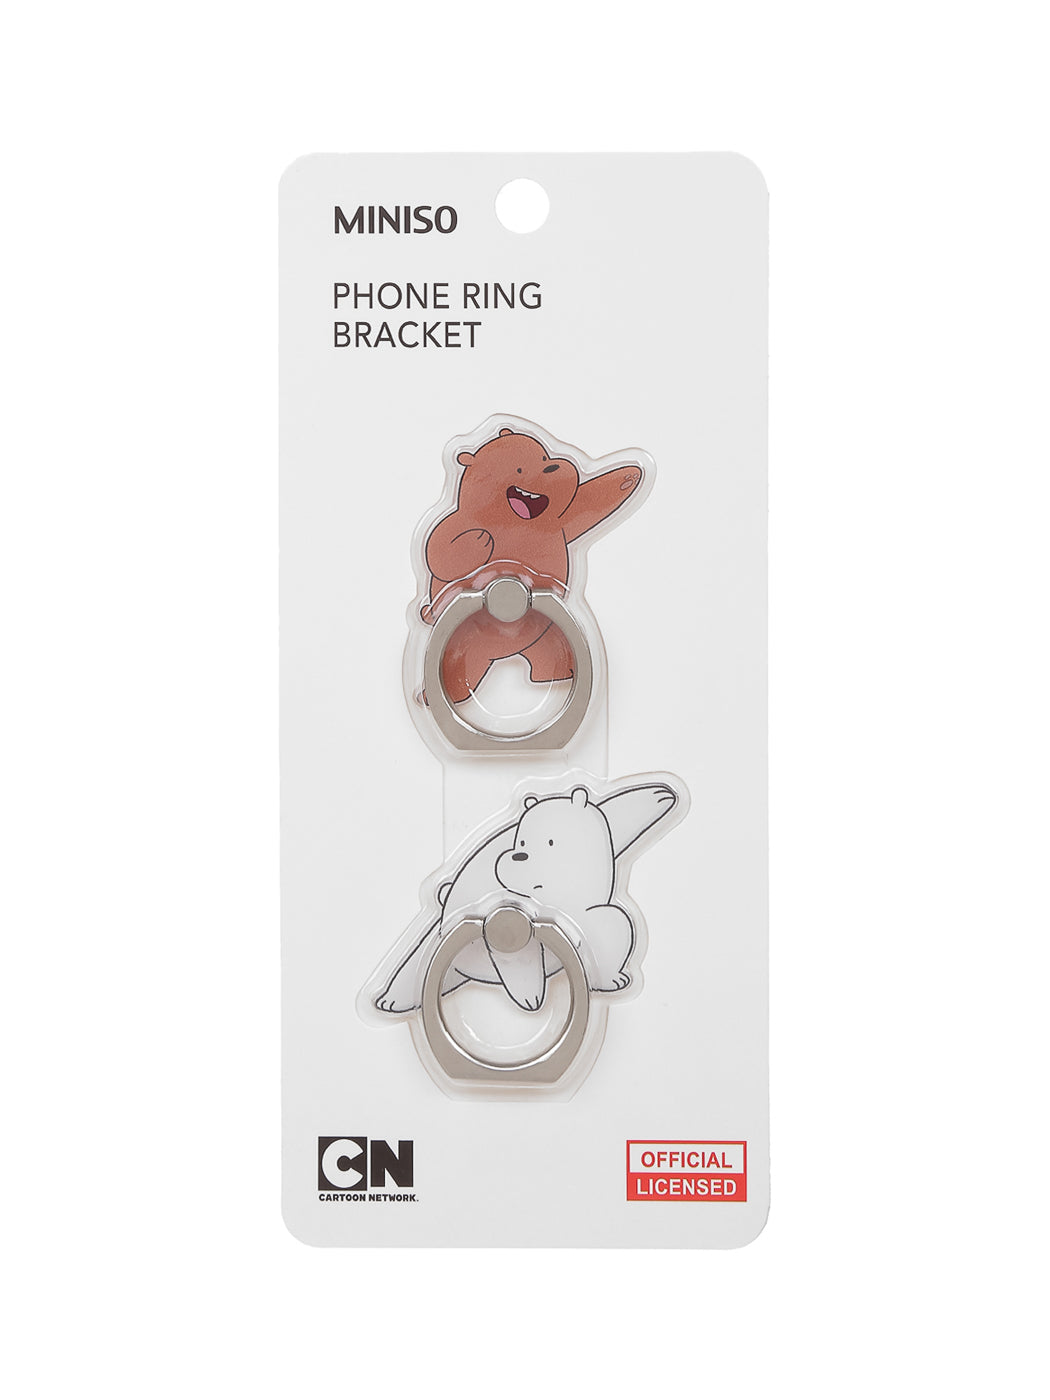 MINISO WE BARE BEARS RING BRACKET 2 PACK 0500019671 ELECTRONICS & ELECTRICAL APPLIANCES